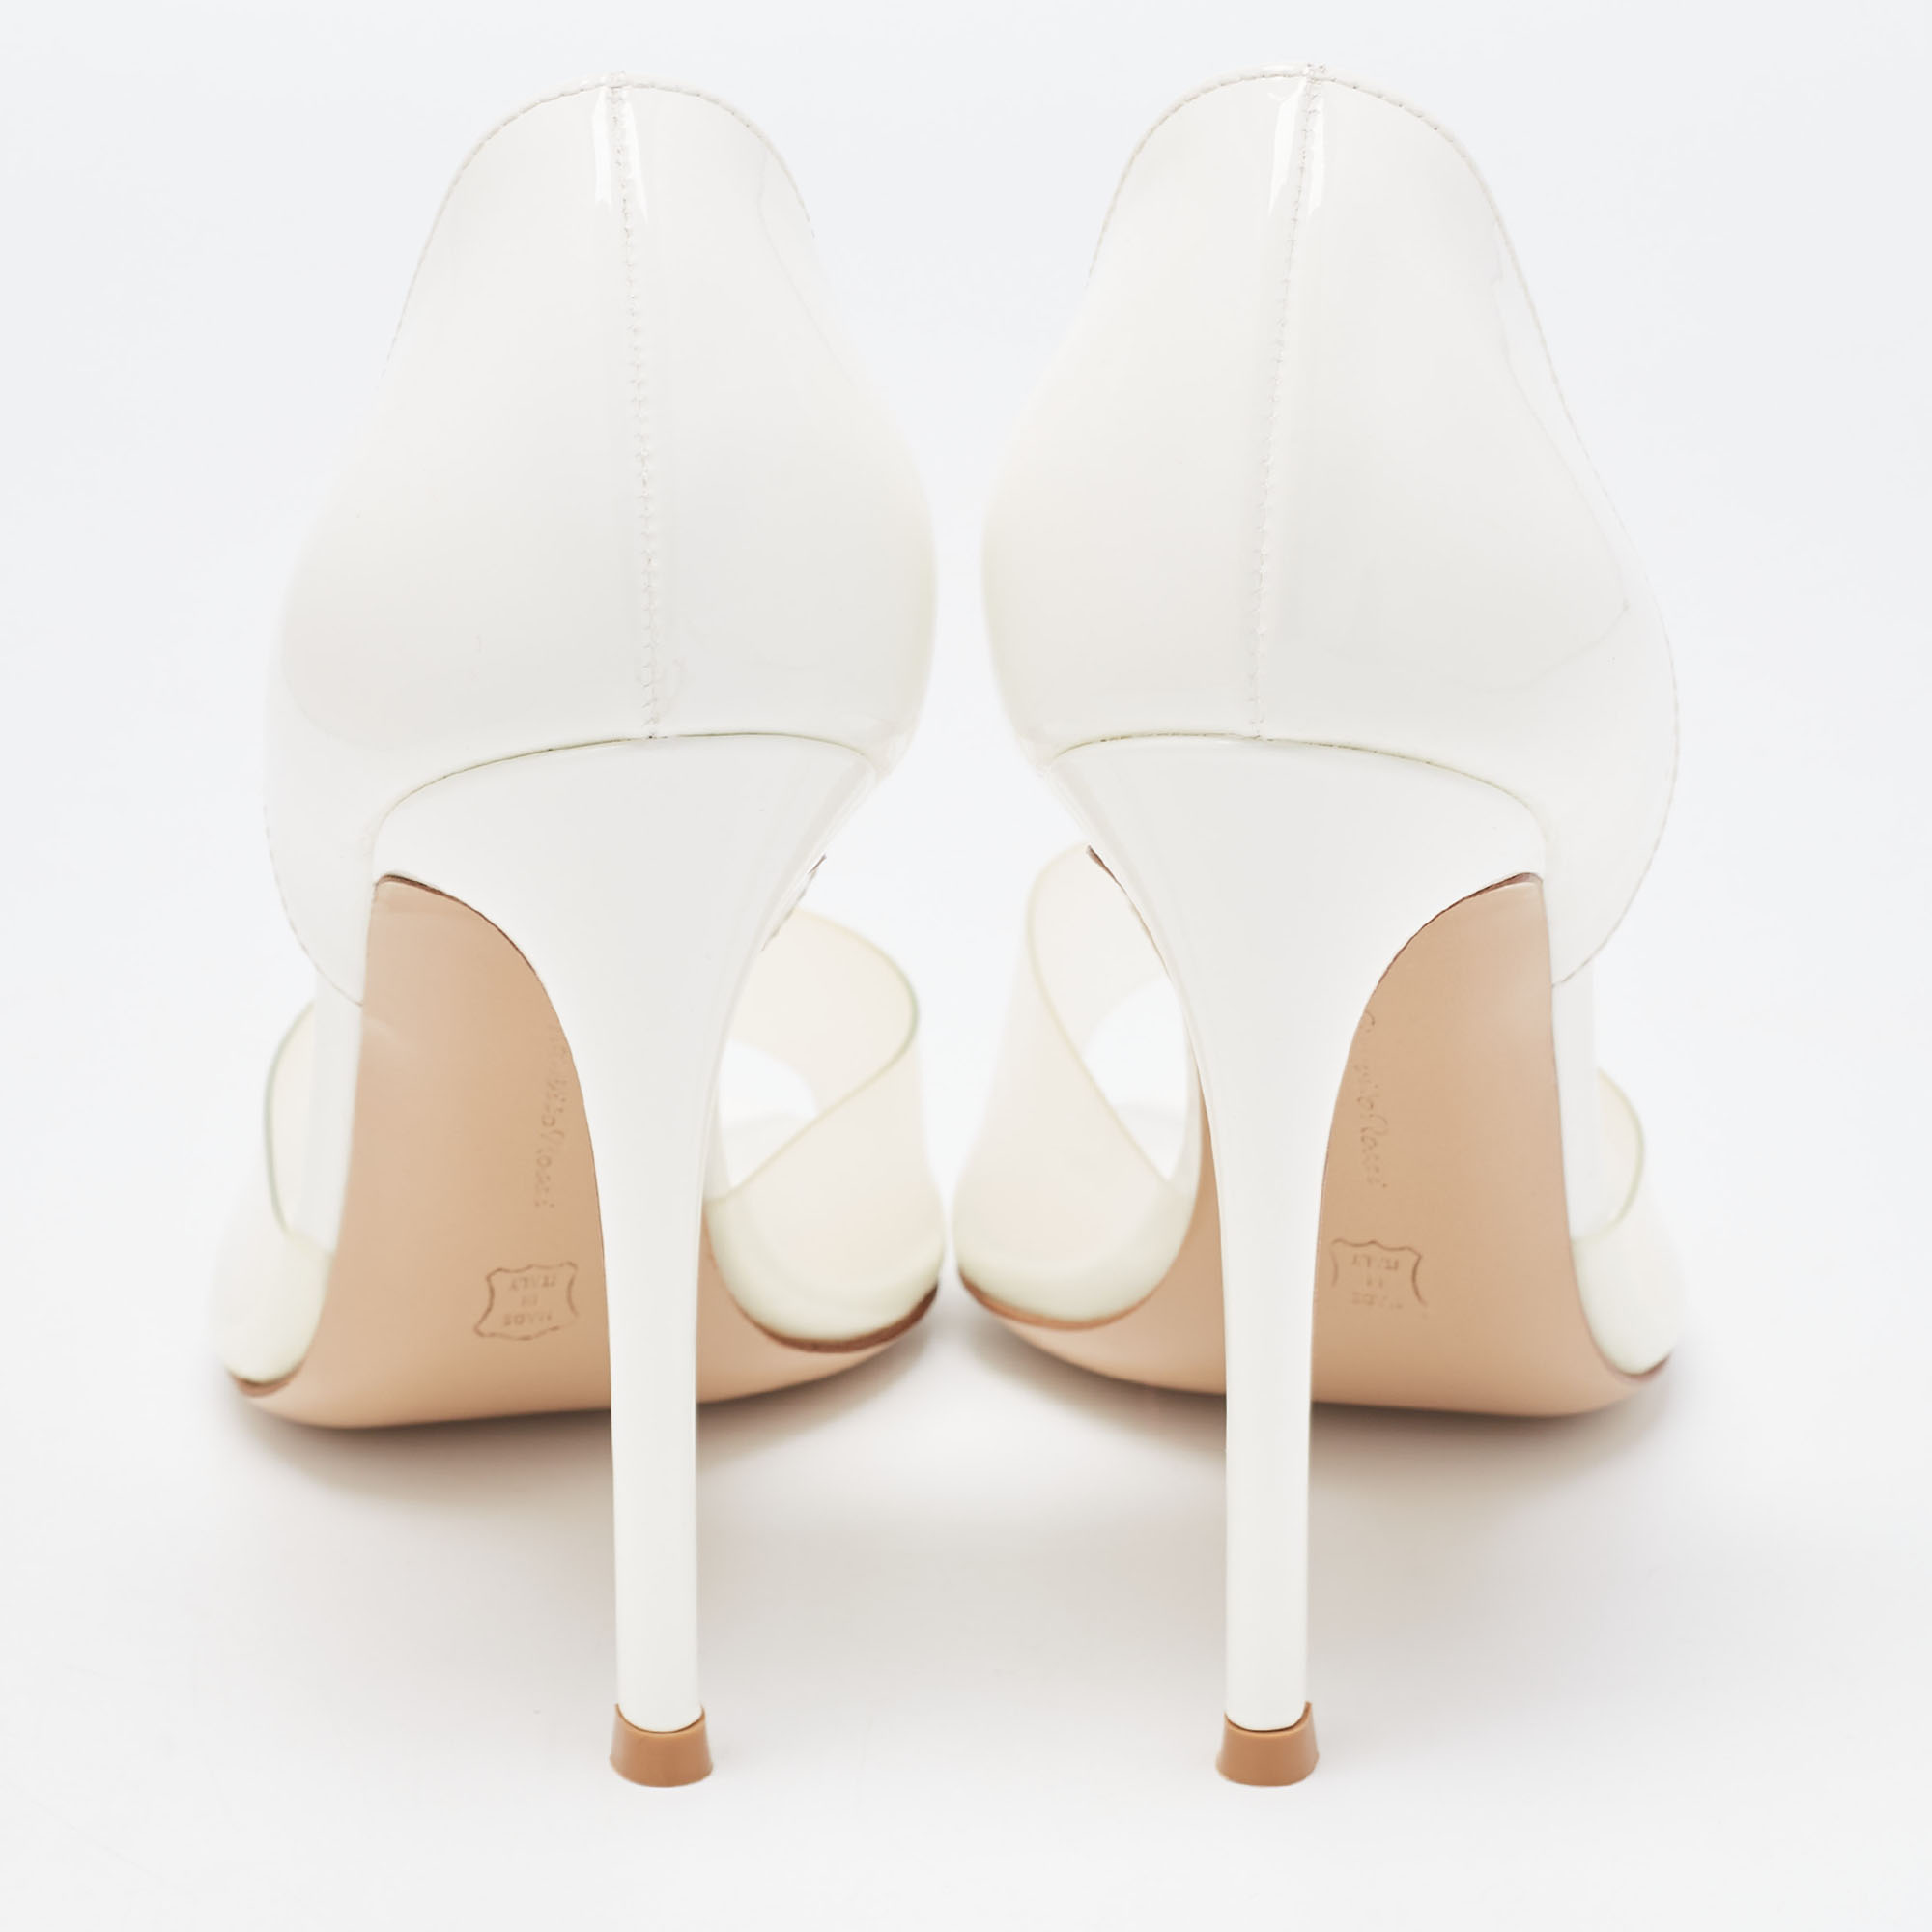 Gianvito Rossi White PVC And Leather Bree D'orsay Pumps Size 38